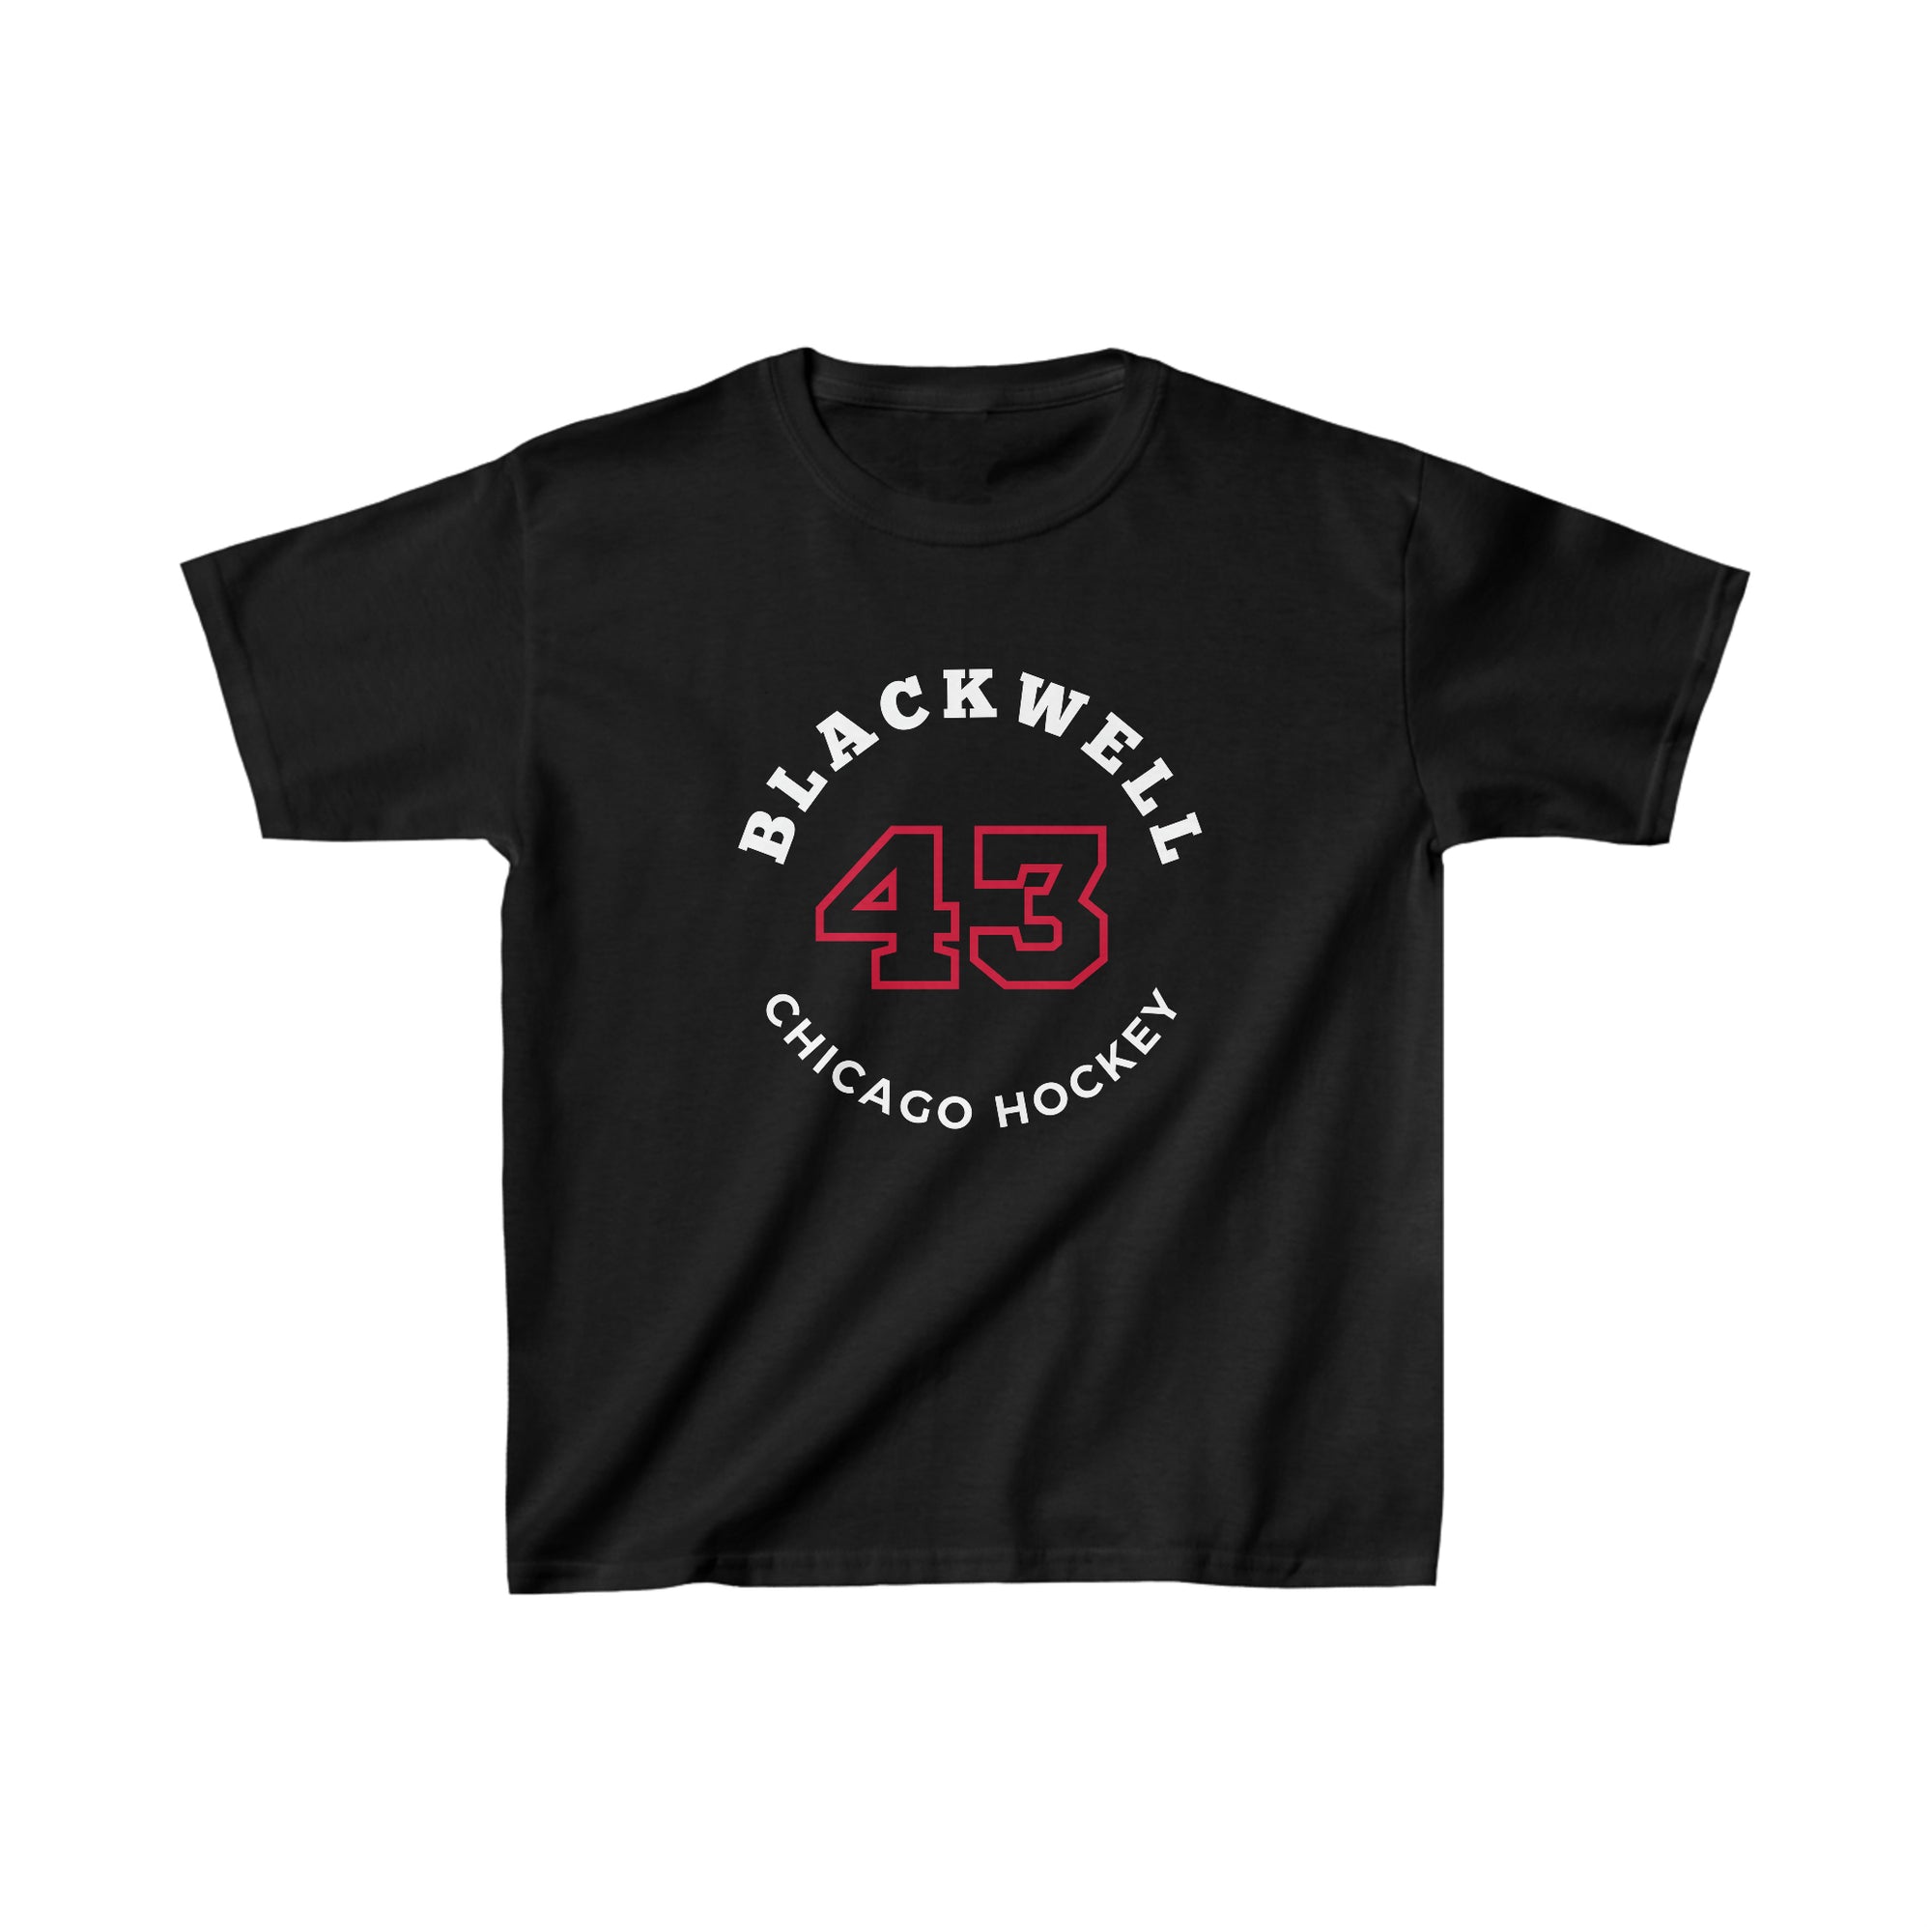 Blackwell 43 Chicago Hockey Number Arch Design Kids Tee